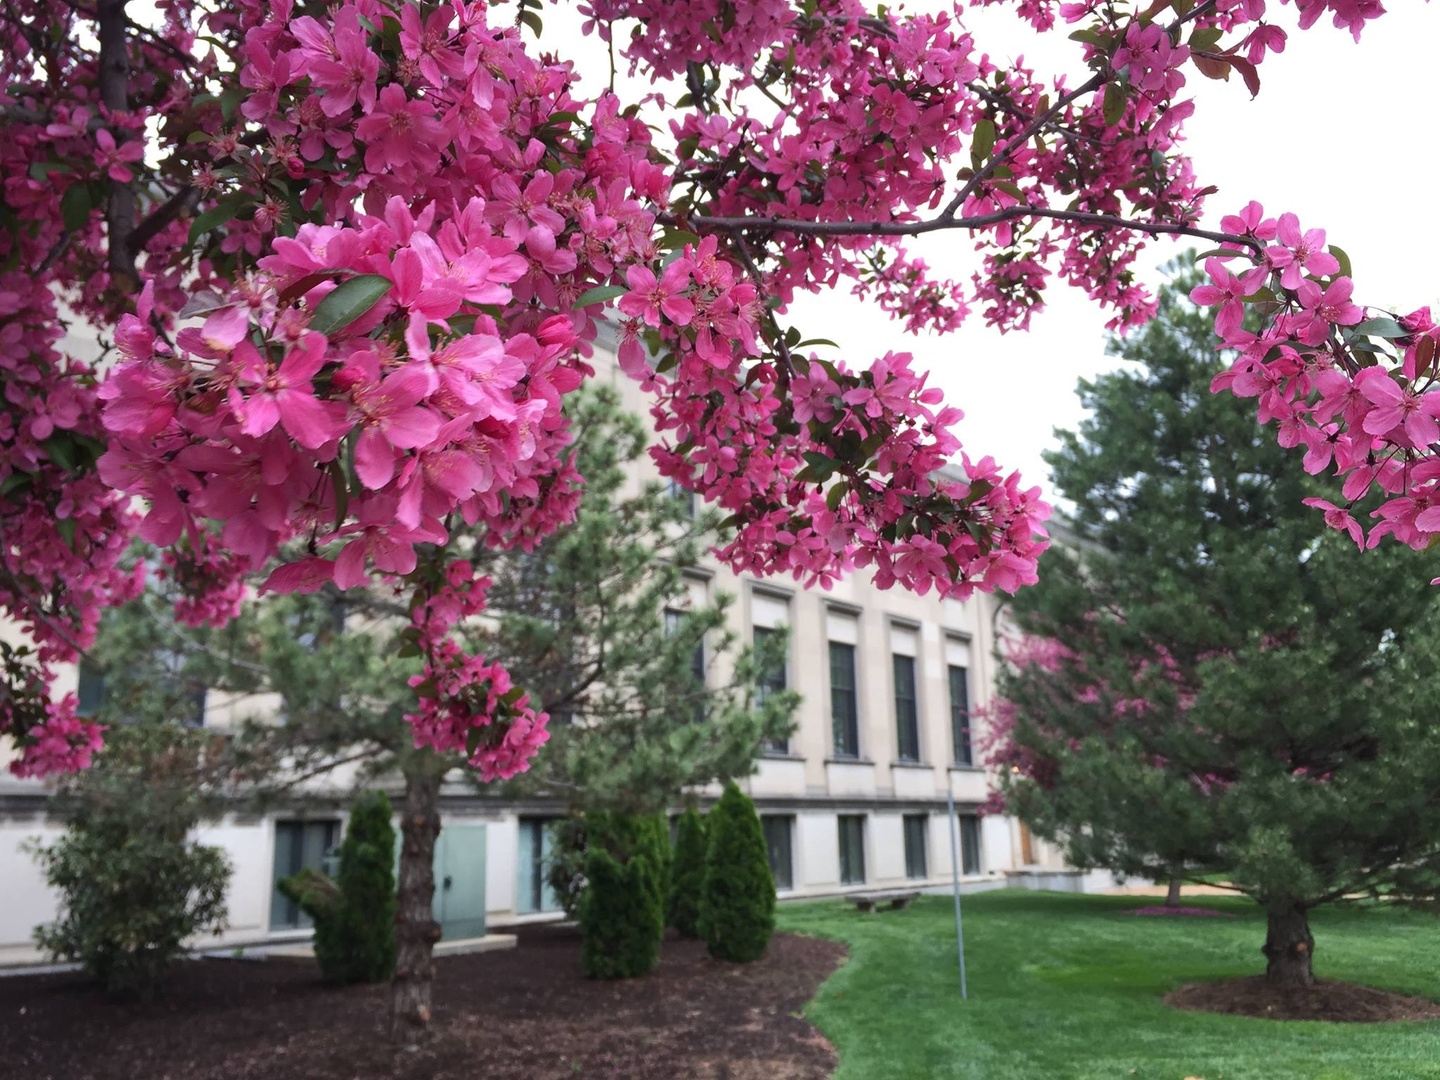 A pink crababble tree in full bloom stretches across a bright white sky in front of a Beax Arts-style limestone academic building.